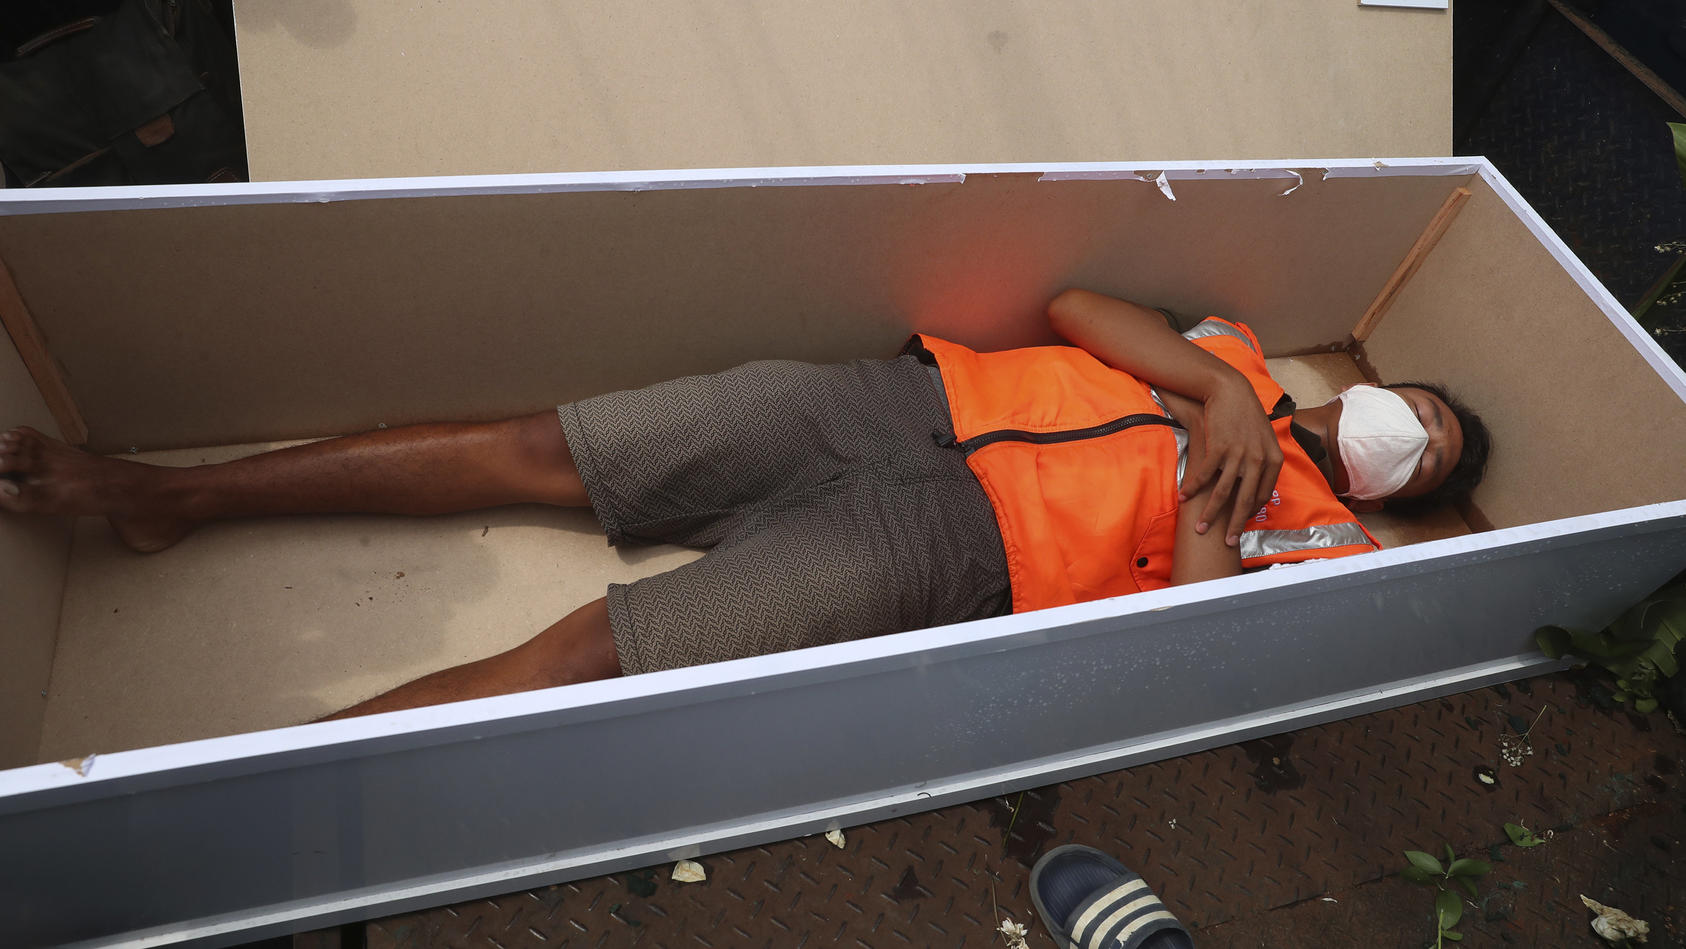 A man lays inside a mock coffin as punishment for violating city regulations requiring people to wear face masks in public places as a precaution against the new coronavirus outbreak in Jakarta, Indonesia, Thursday, Sept. 3, 2020. (AP Photo/Achmad Ib